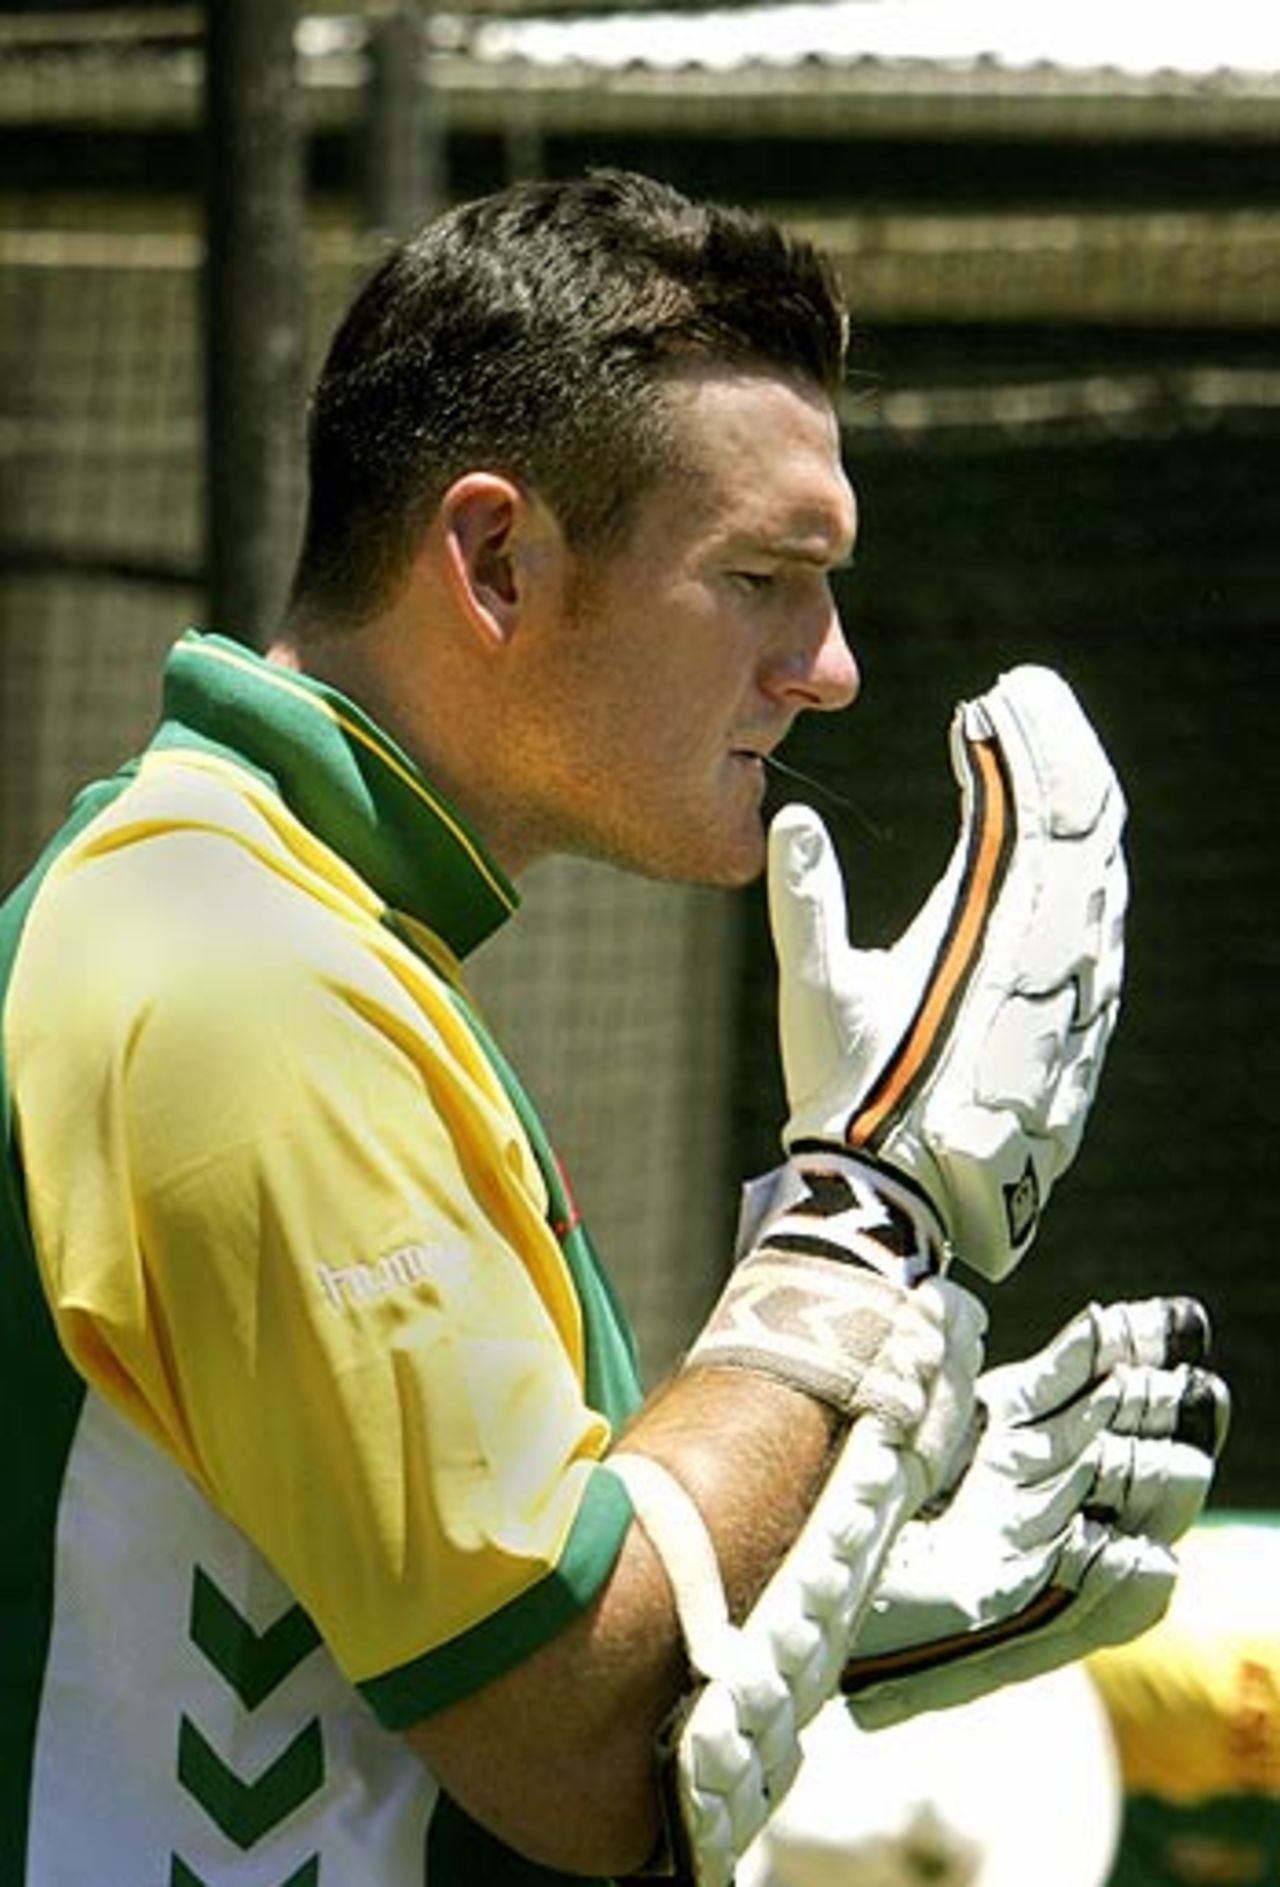 Graeme Smith gears up for the third Test at Sydney, January 1, 2006